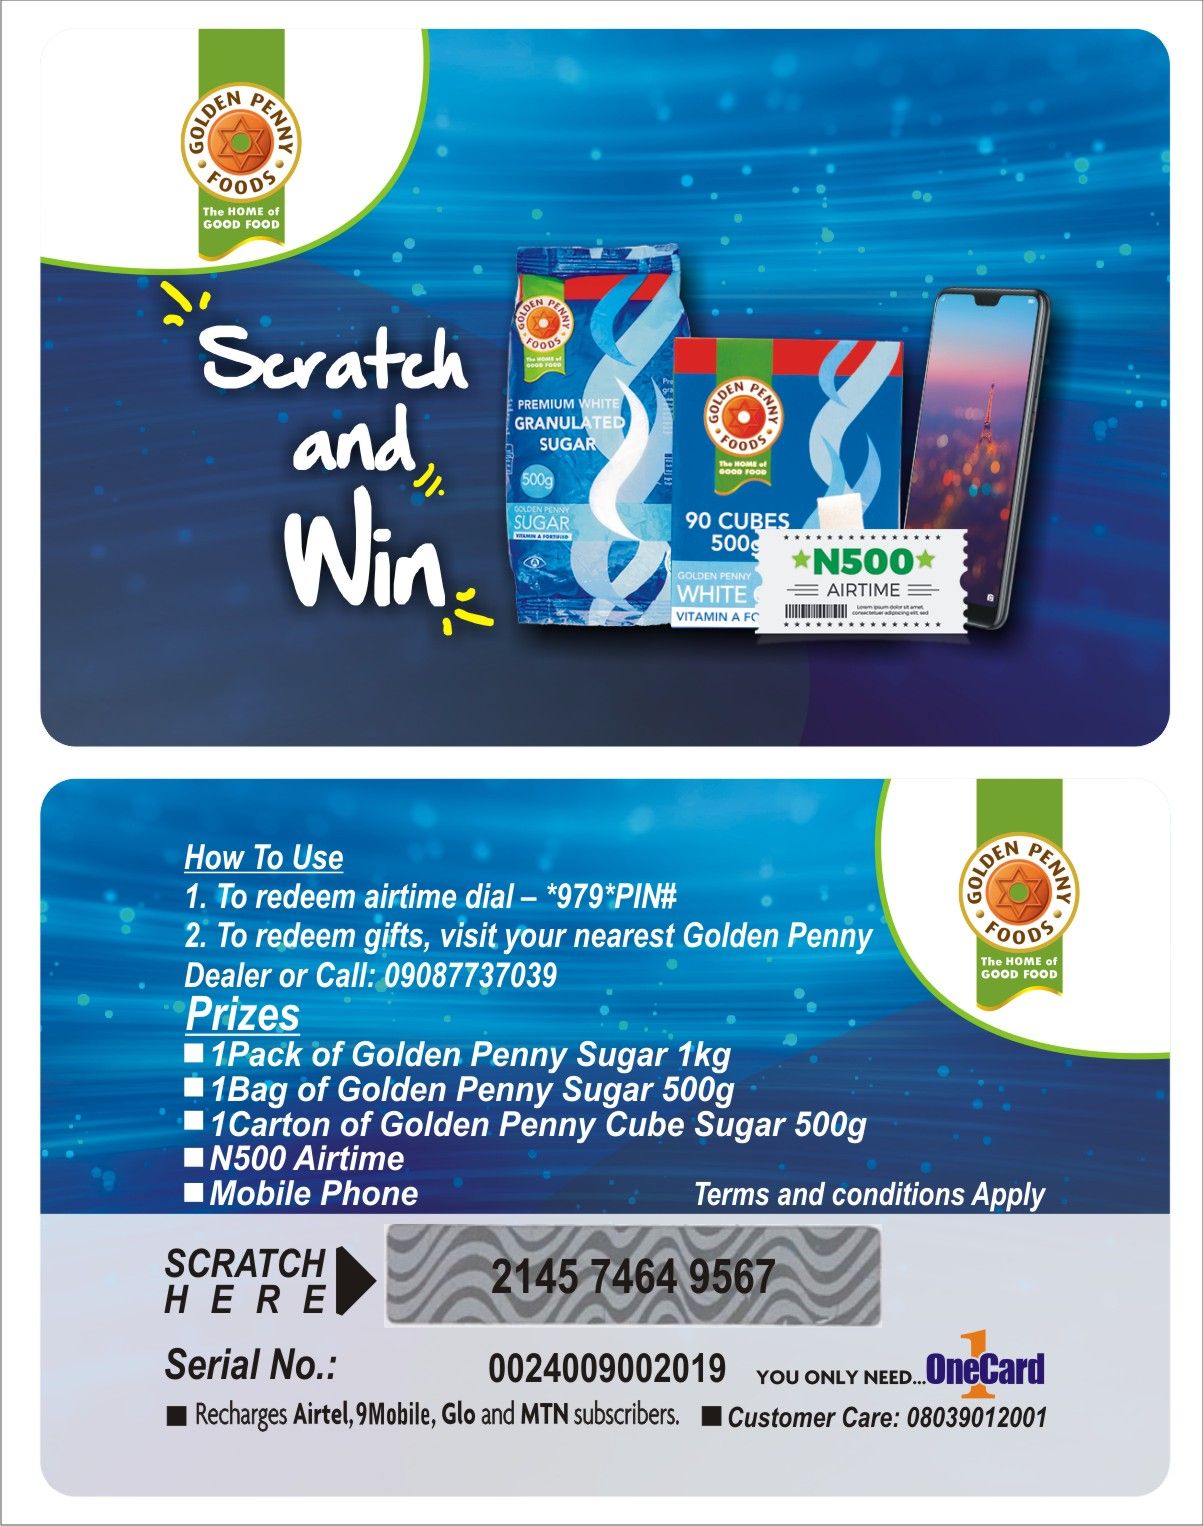 HOW TO GENERATE MORE SALES USING A SCRATCH & WIN PROMO: CALL CHINEDU ON 08179651585 TO PRINT SCRATCH & WIN PROMO CARDS